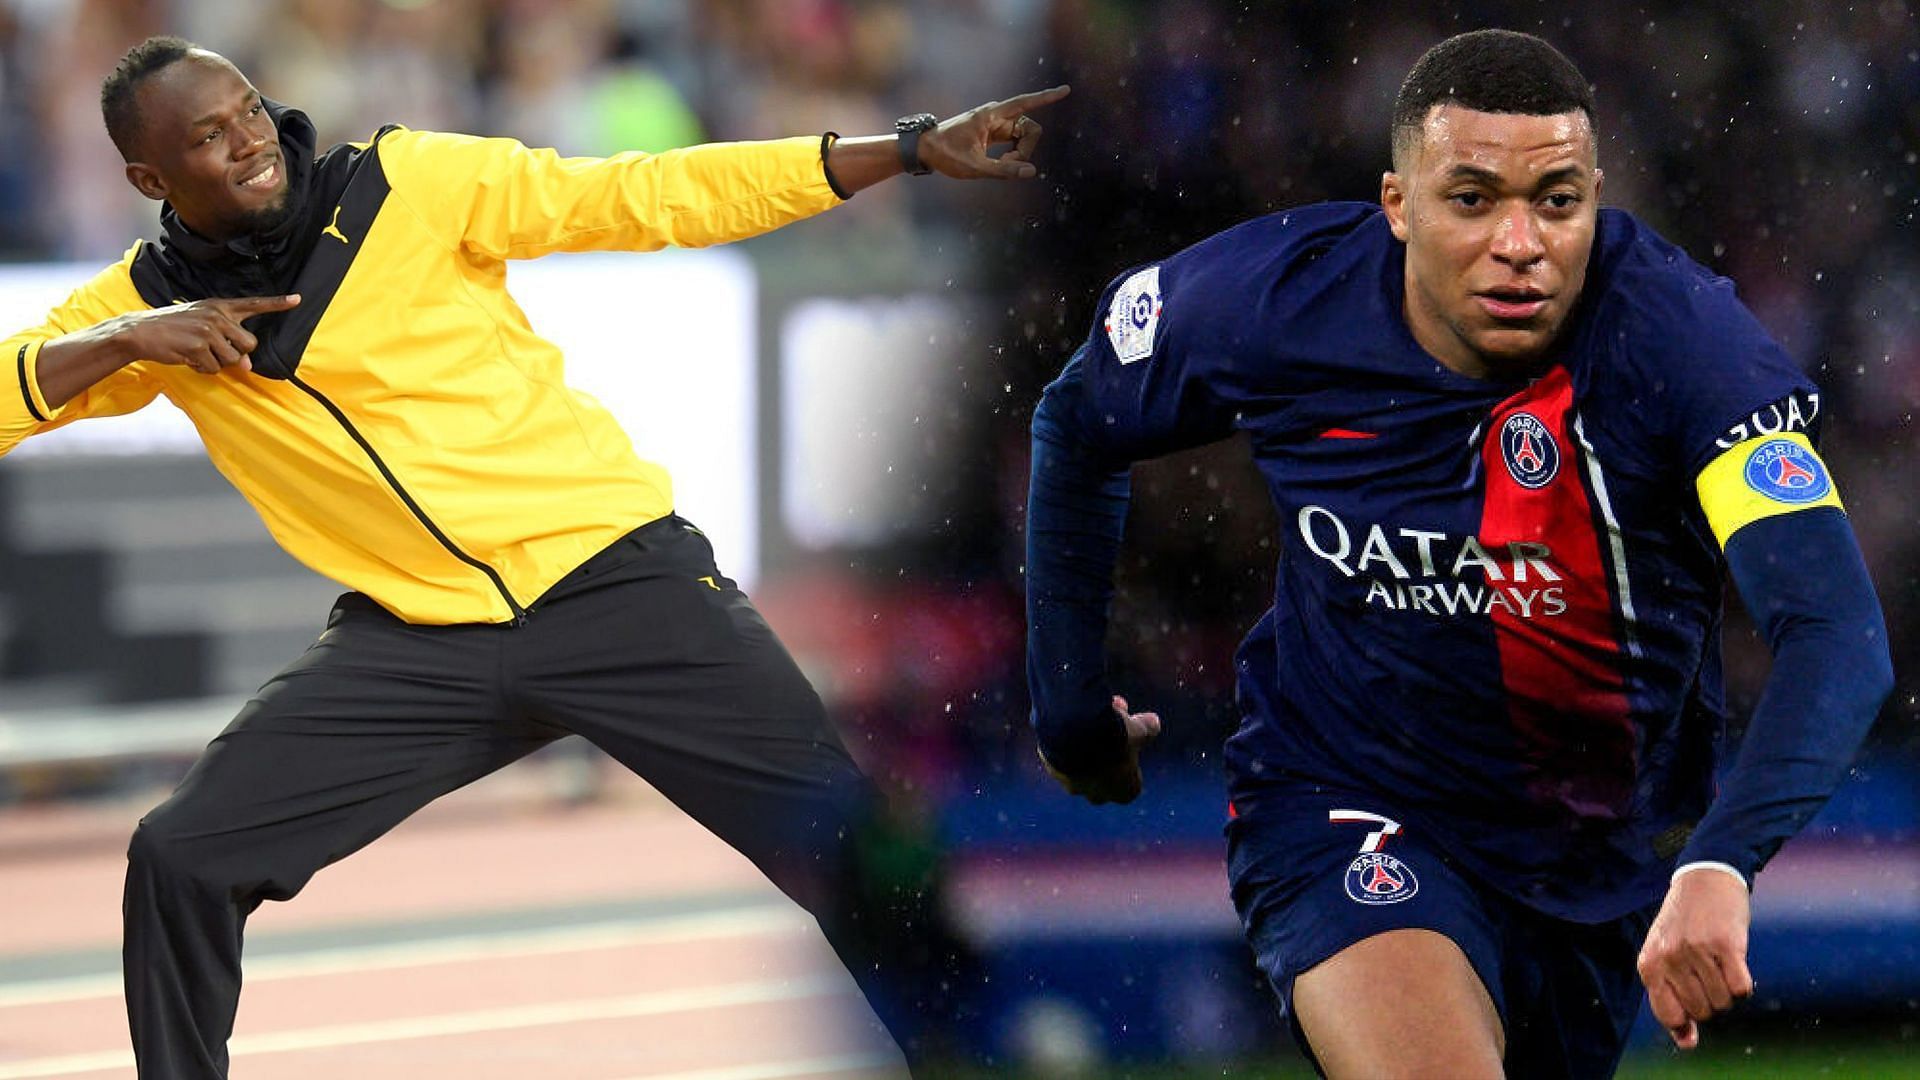 Usain Bolt and Kylian Mbappe are both masters in their respective fields.